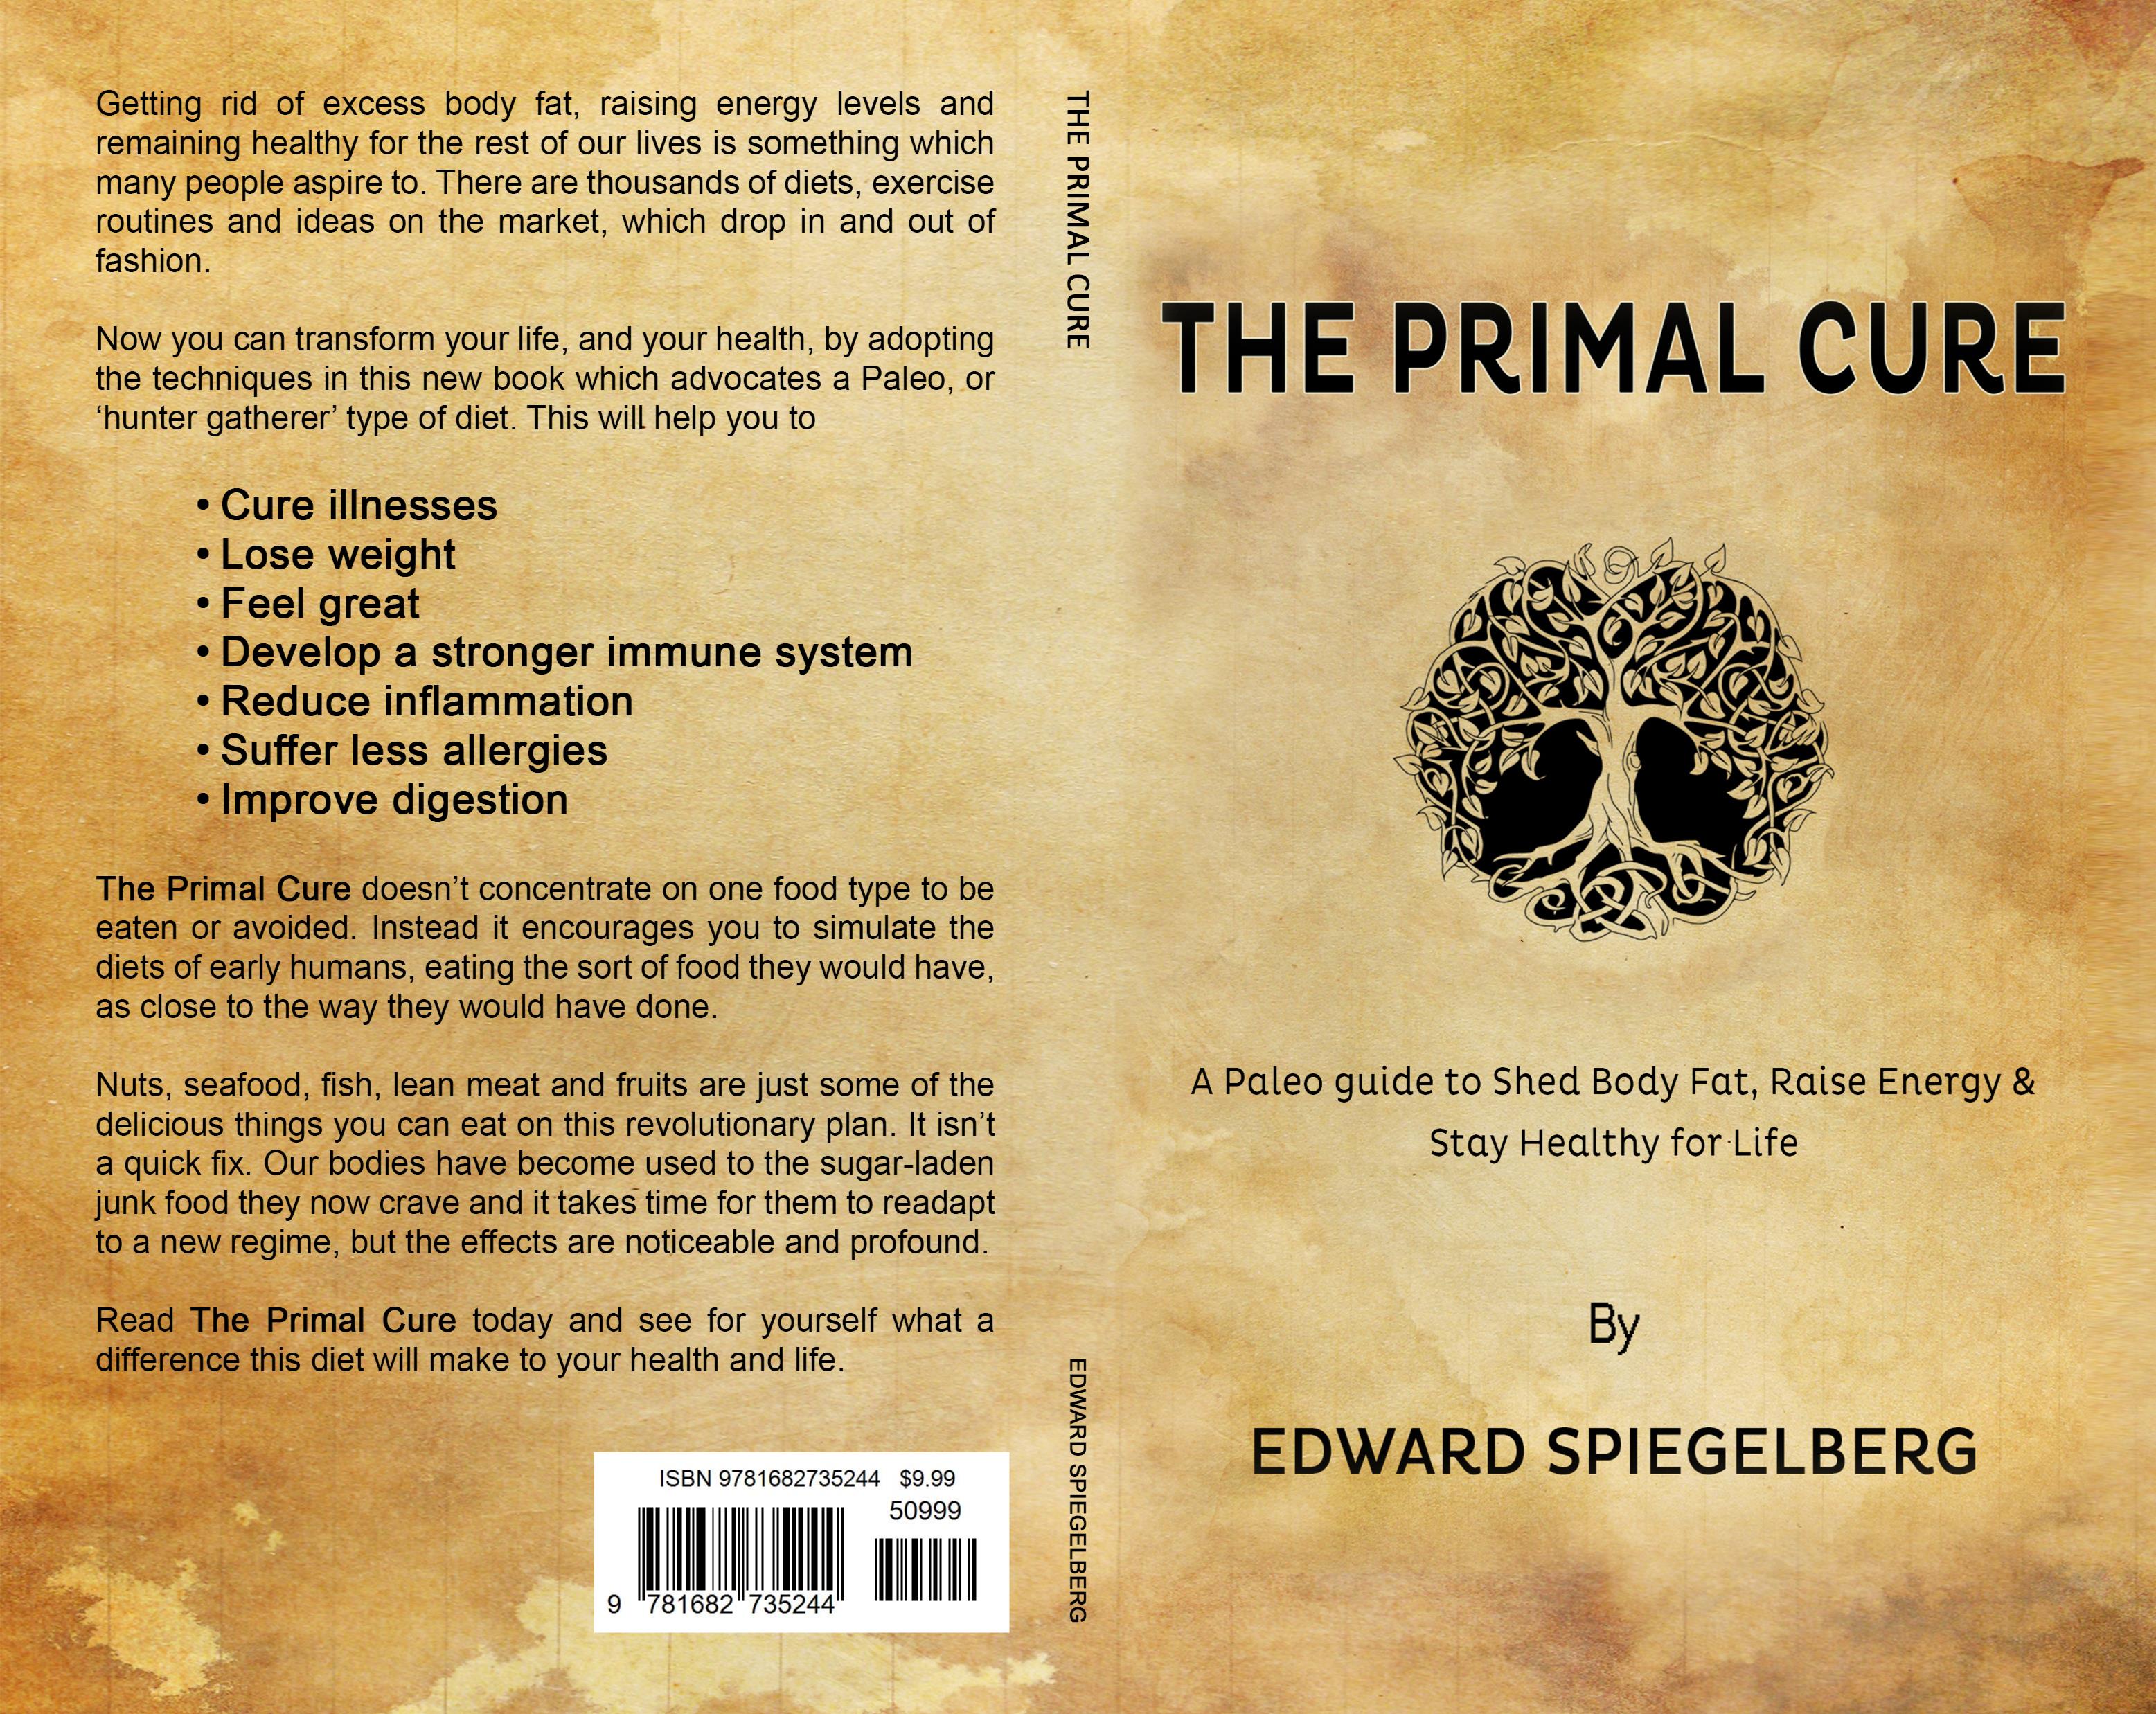 The Primal Cure cover image